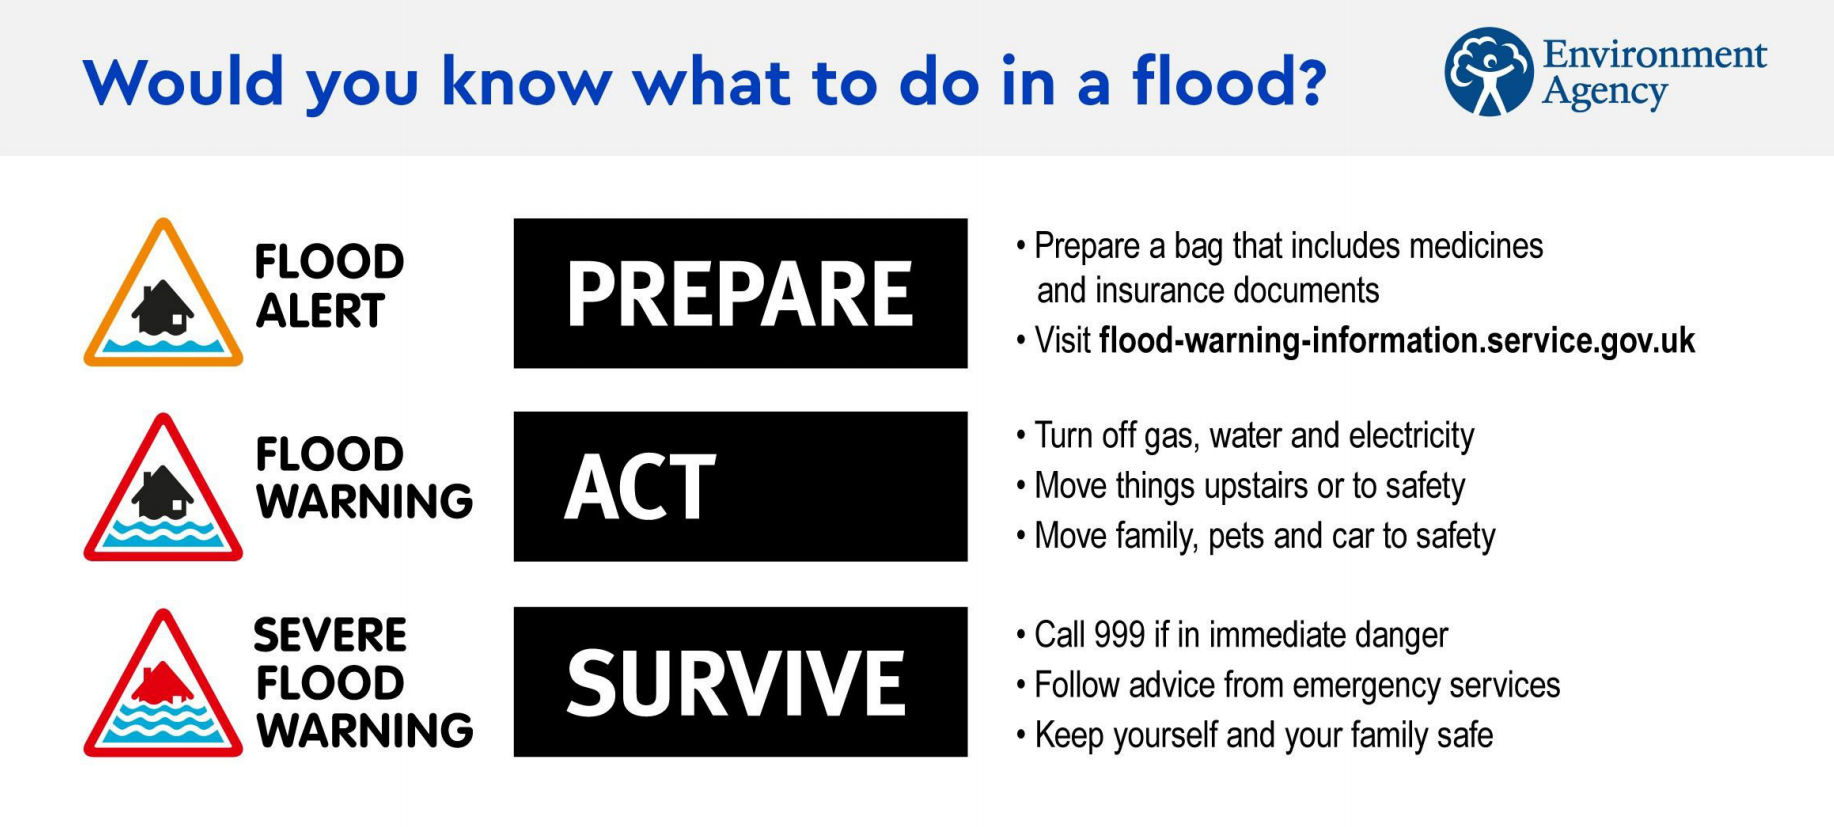 What to do in a flood poster